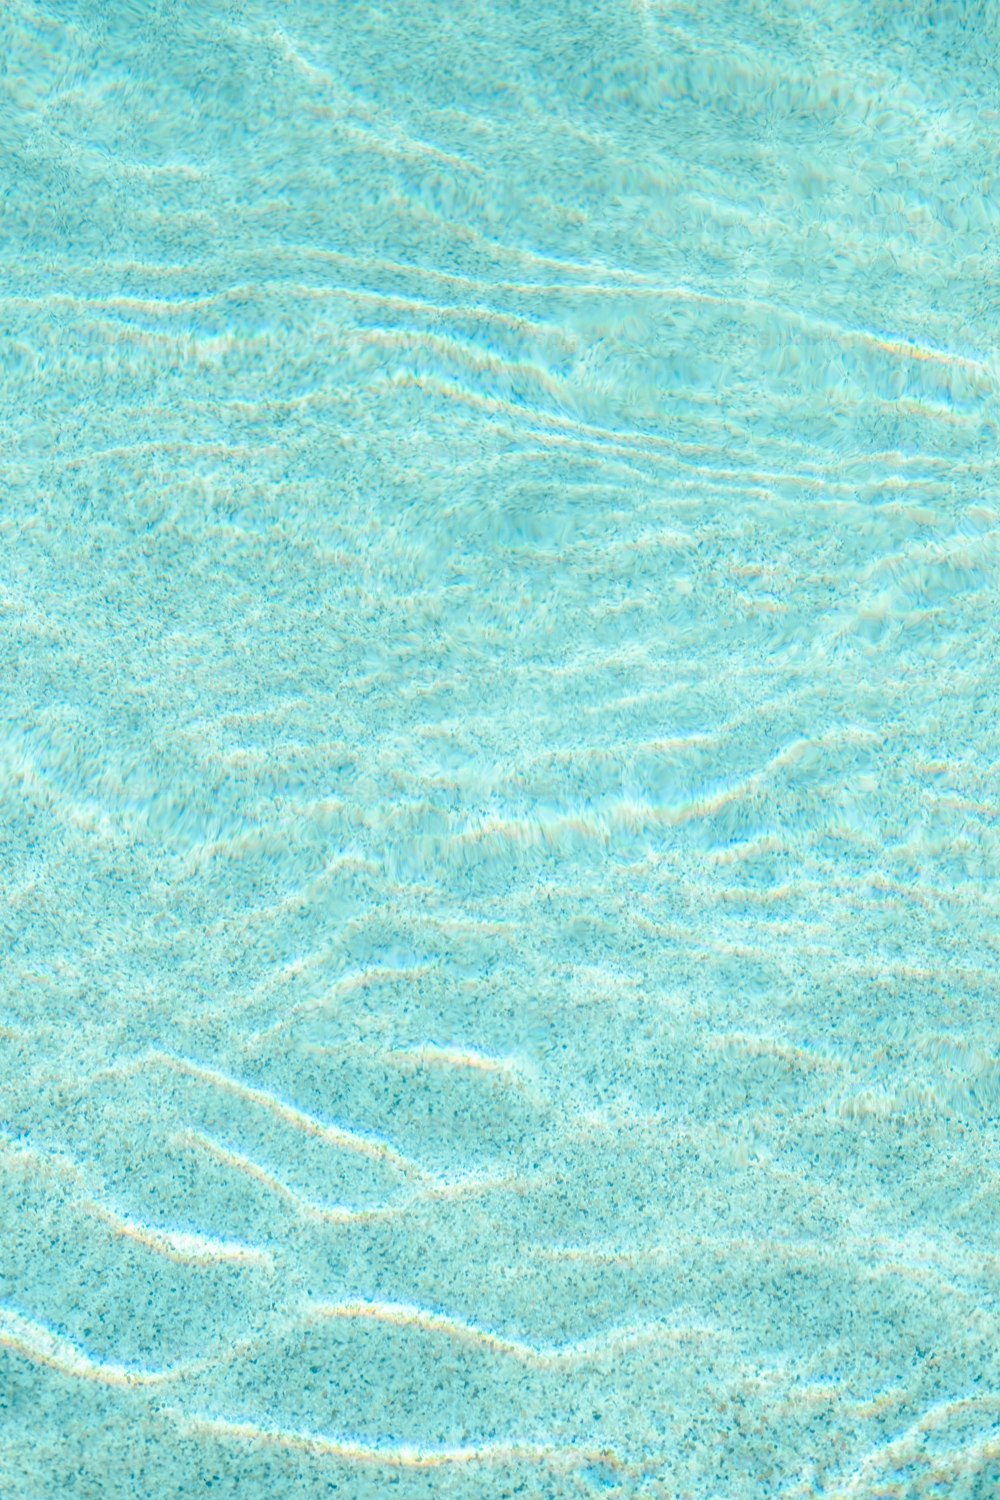 a blue pool with clear water and ripples